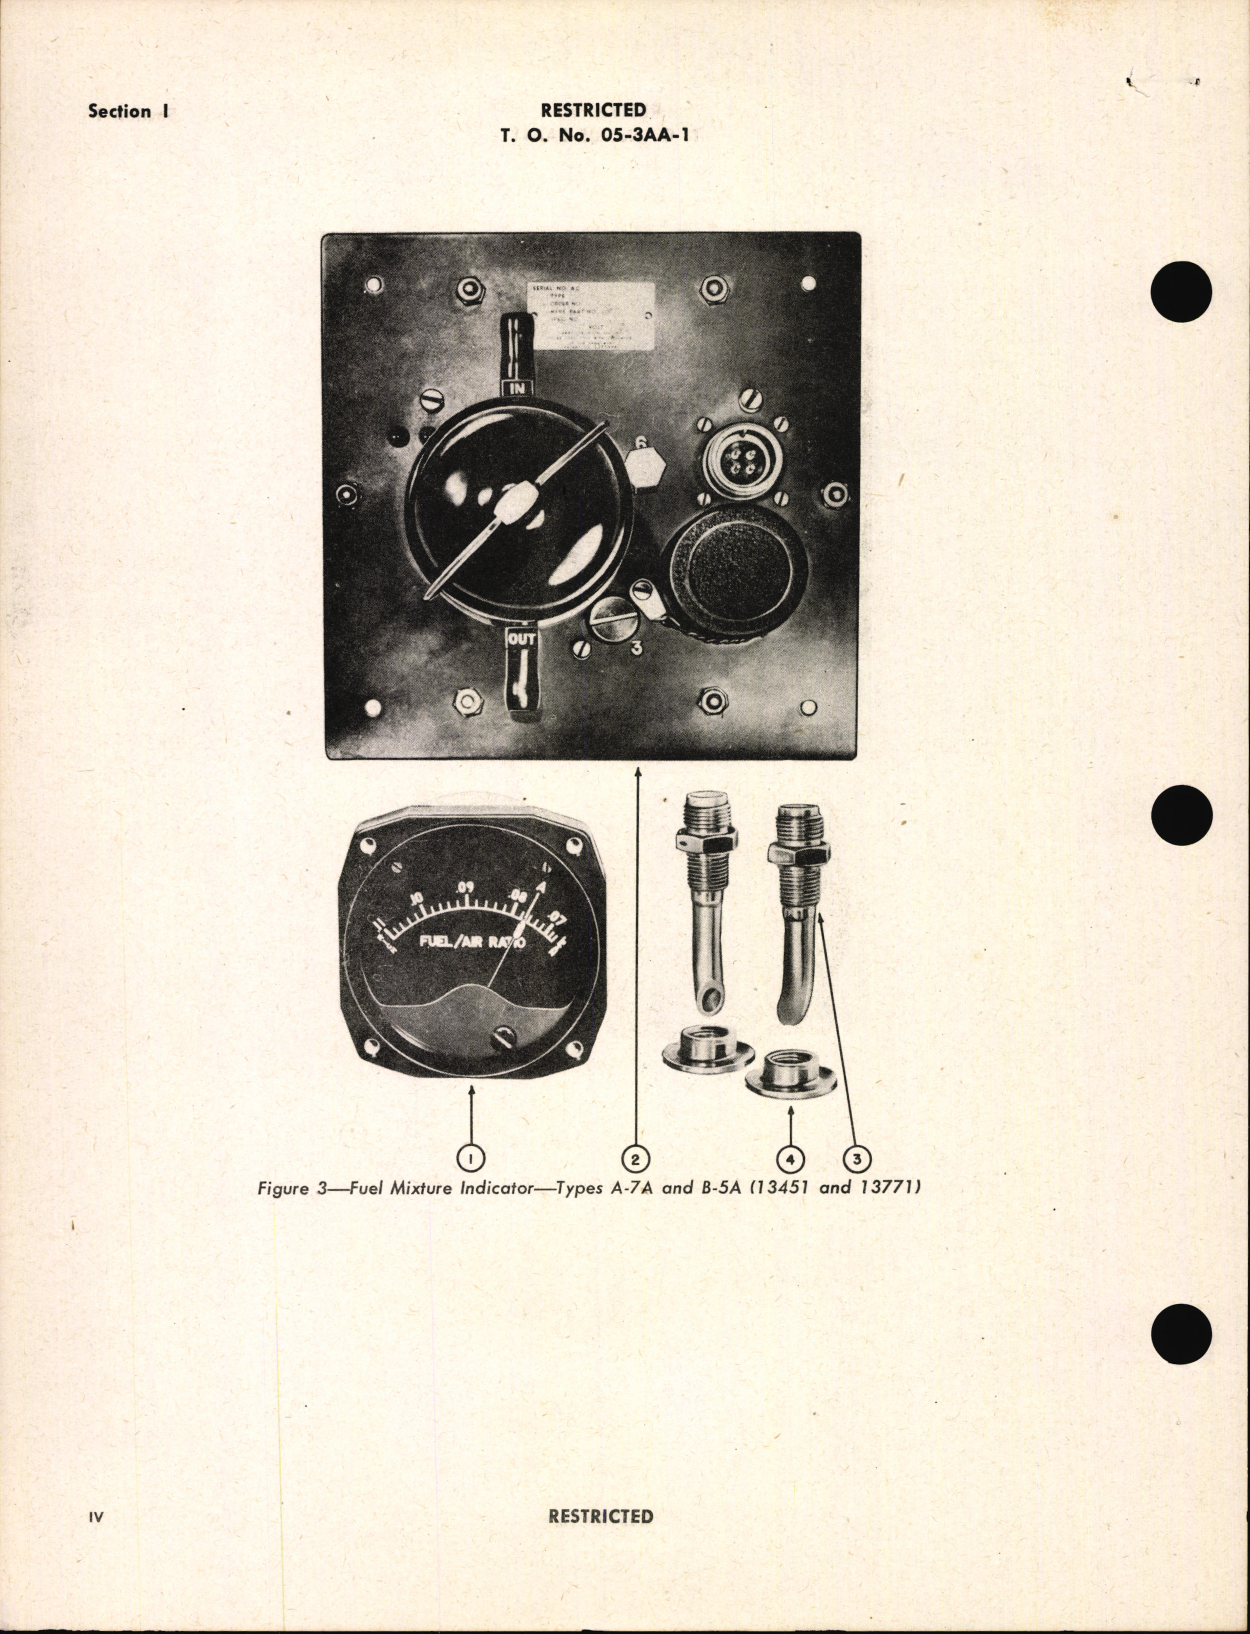 Sample page 6 from AirCorps Library document: Handbook of Instructions with Parts Catalog for Fuel Mixture Indicators